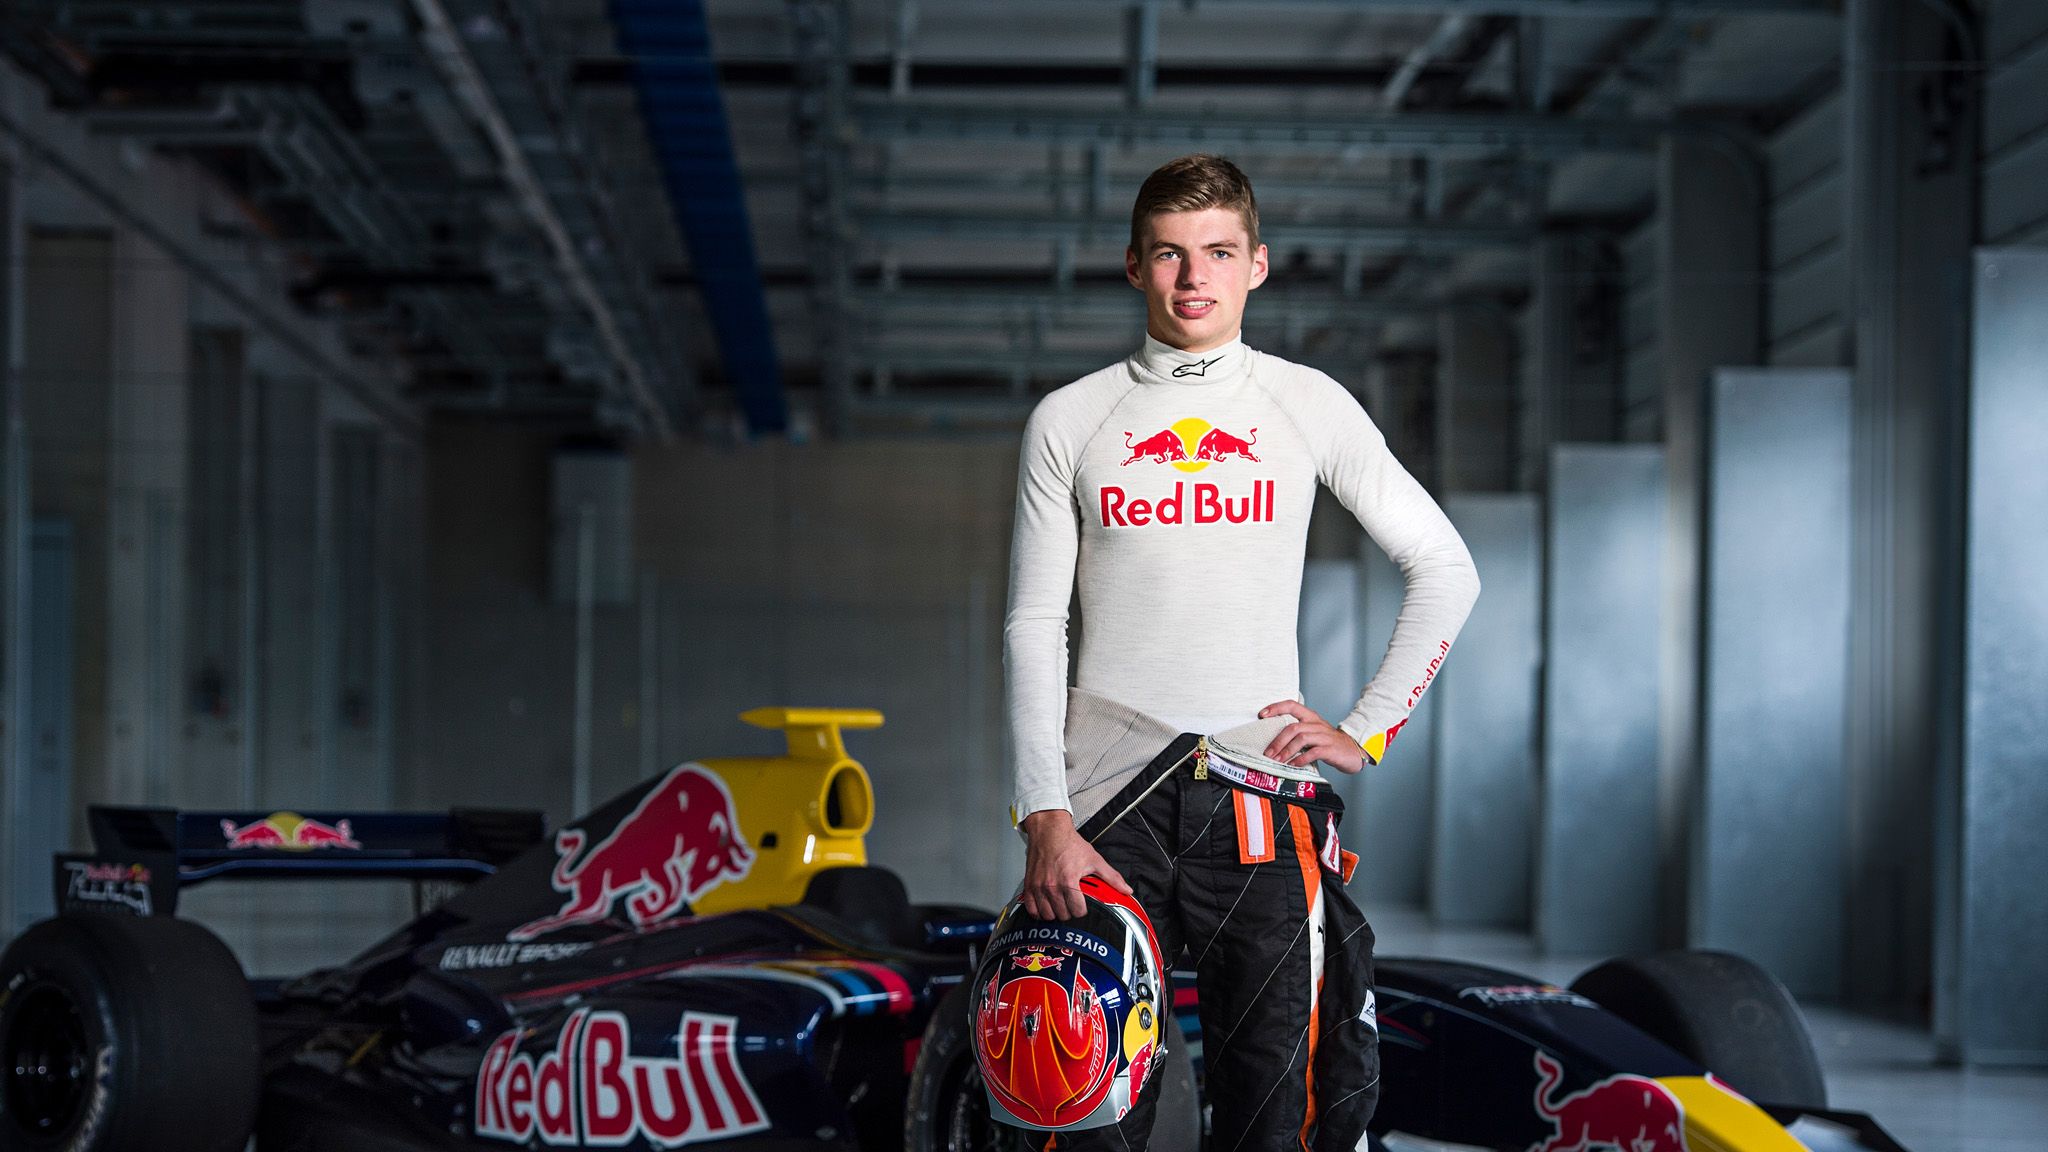 Exclusive QandA New Toro Rosso driver Max Verstappen on his meteoric rise to F1 F1 News